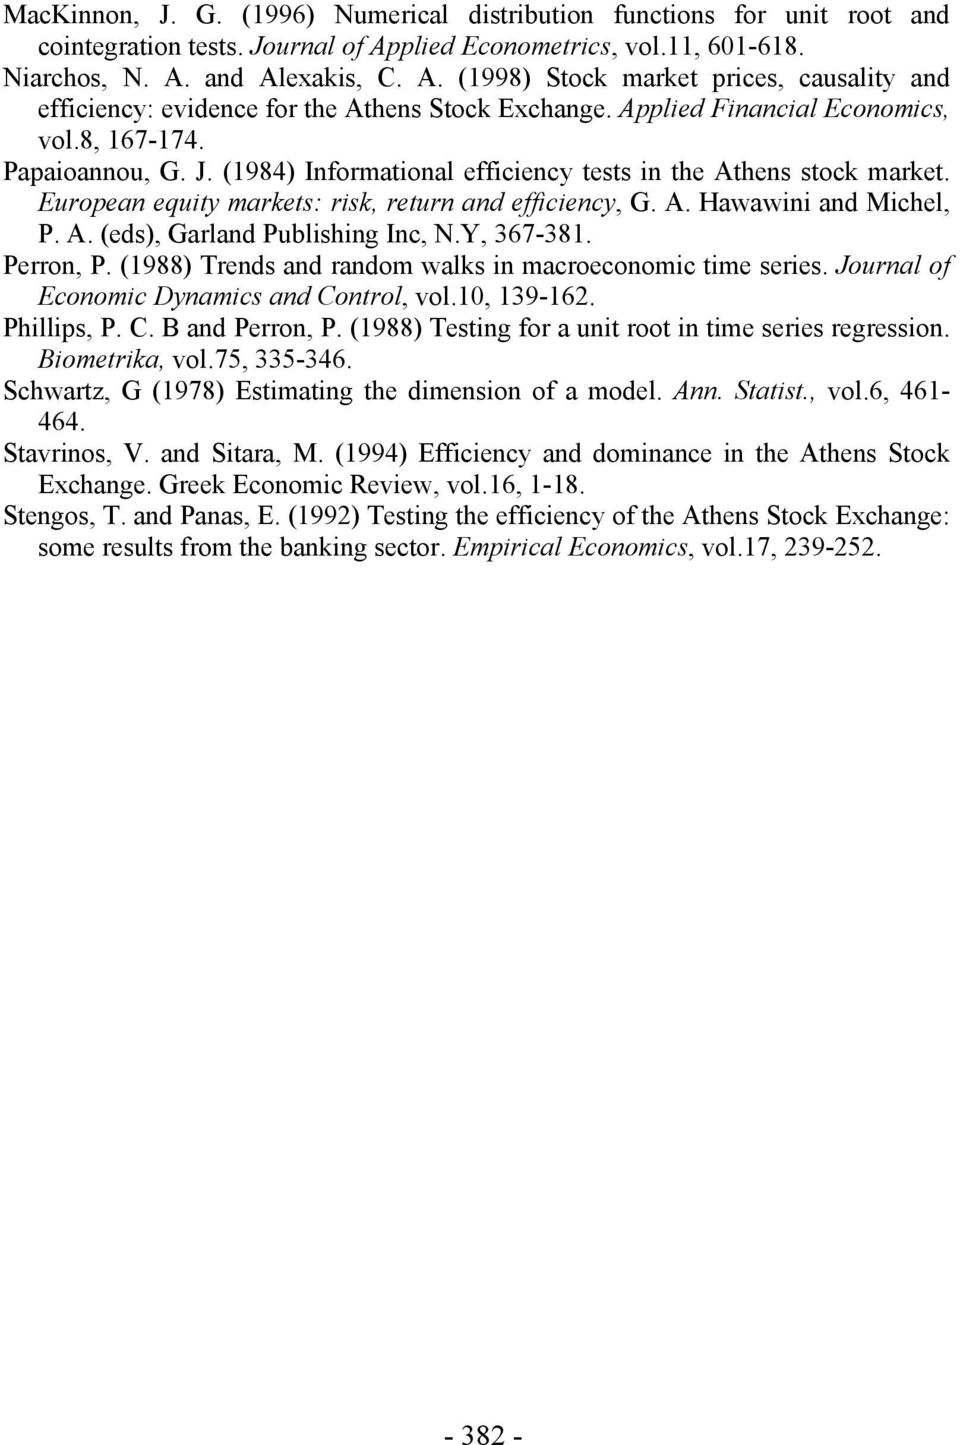 A. (eds), Garland Publishing Inc, N.Y, 367-38. Perron, P. (988) Trends and random walks in macroeconomic ime series. Journal of Economic Dynamics and Conrol, vol.0, 39-62. Phillips, P. C. B and Perron, P.